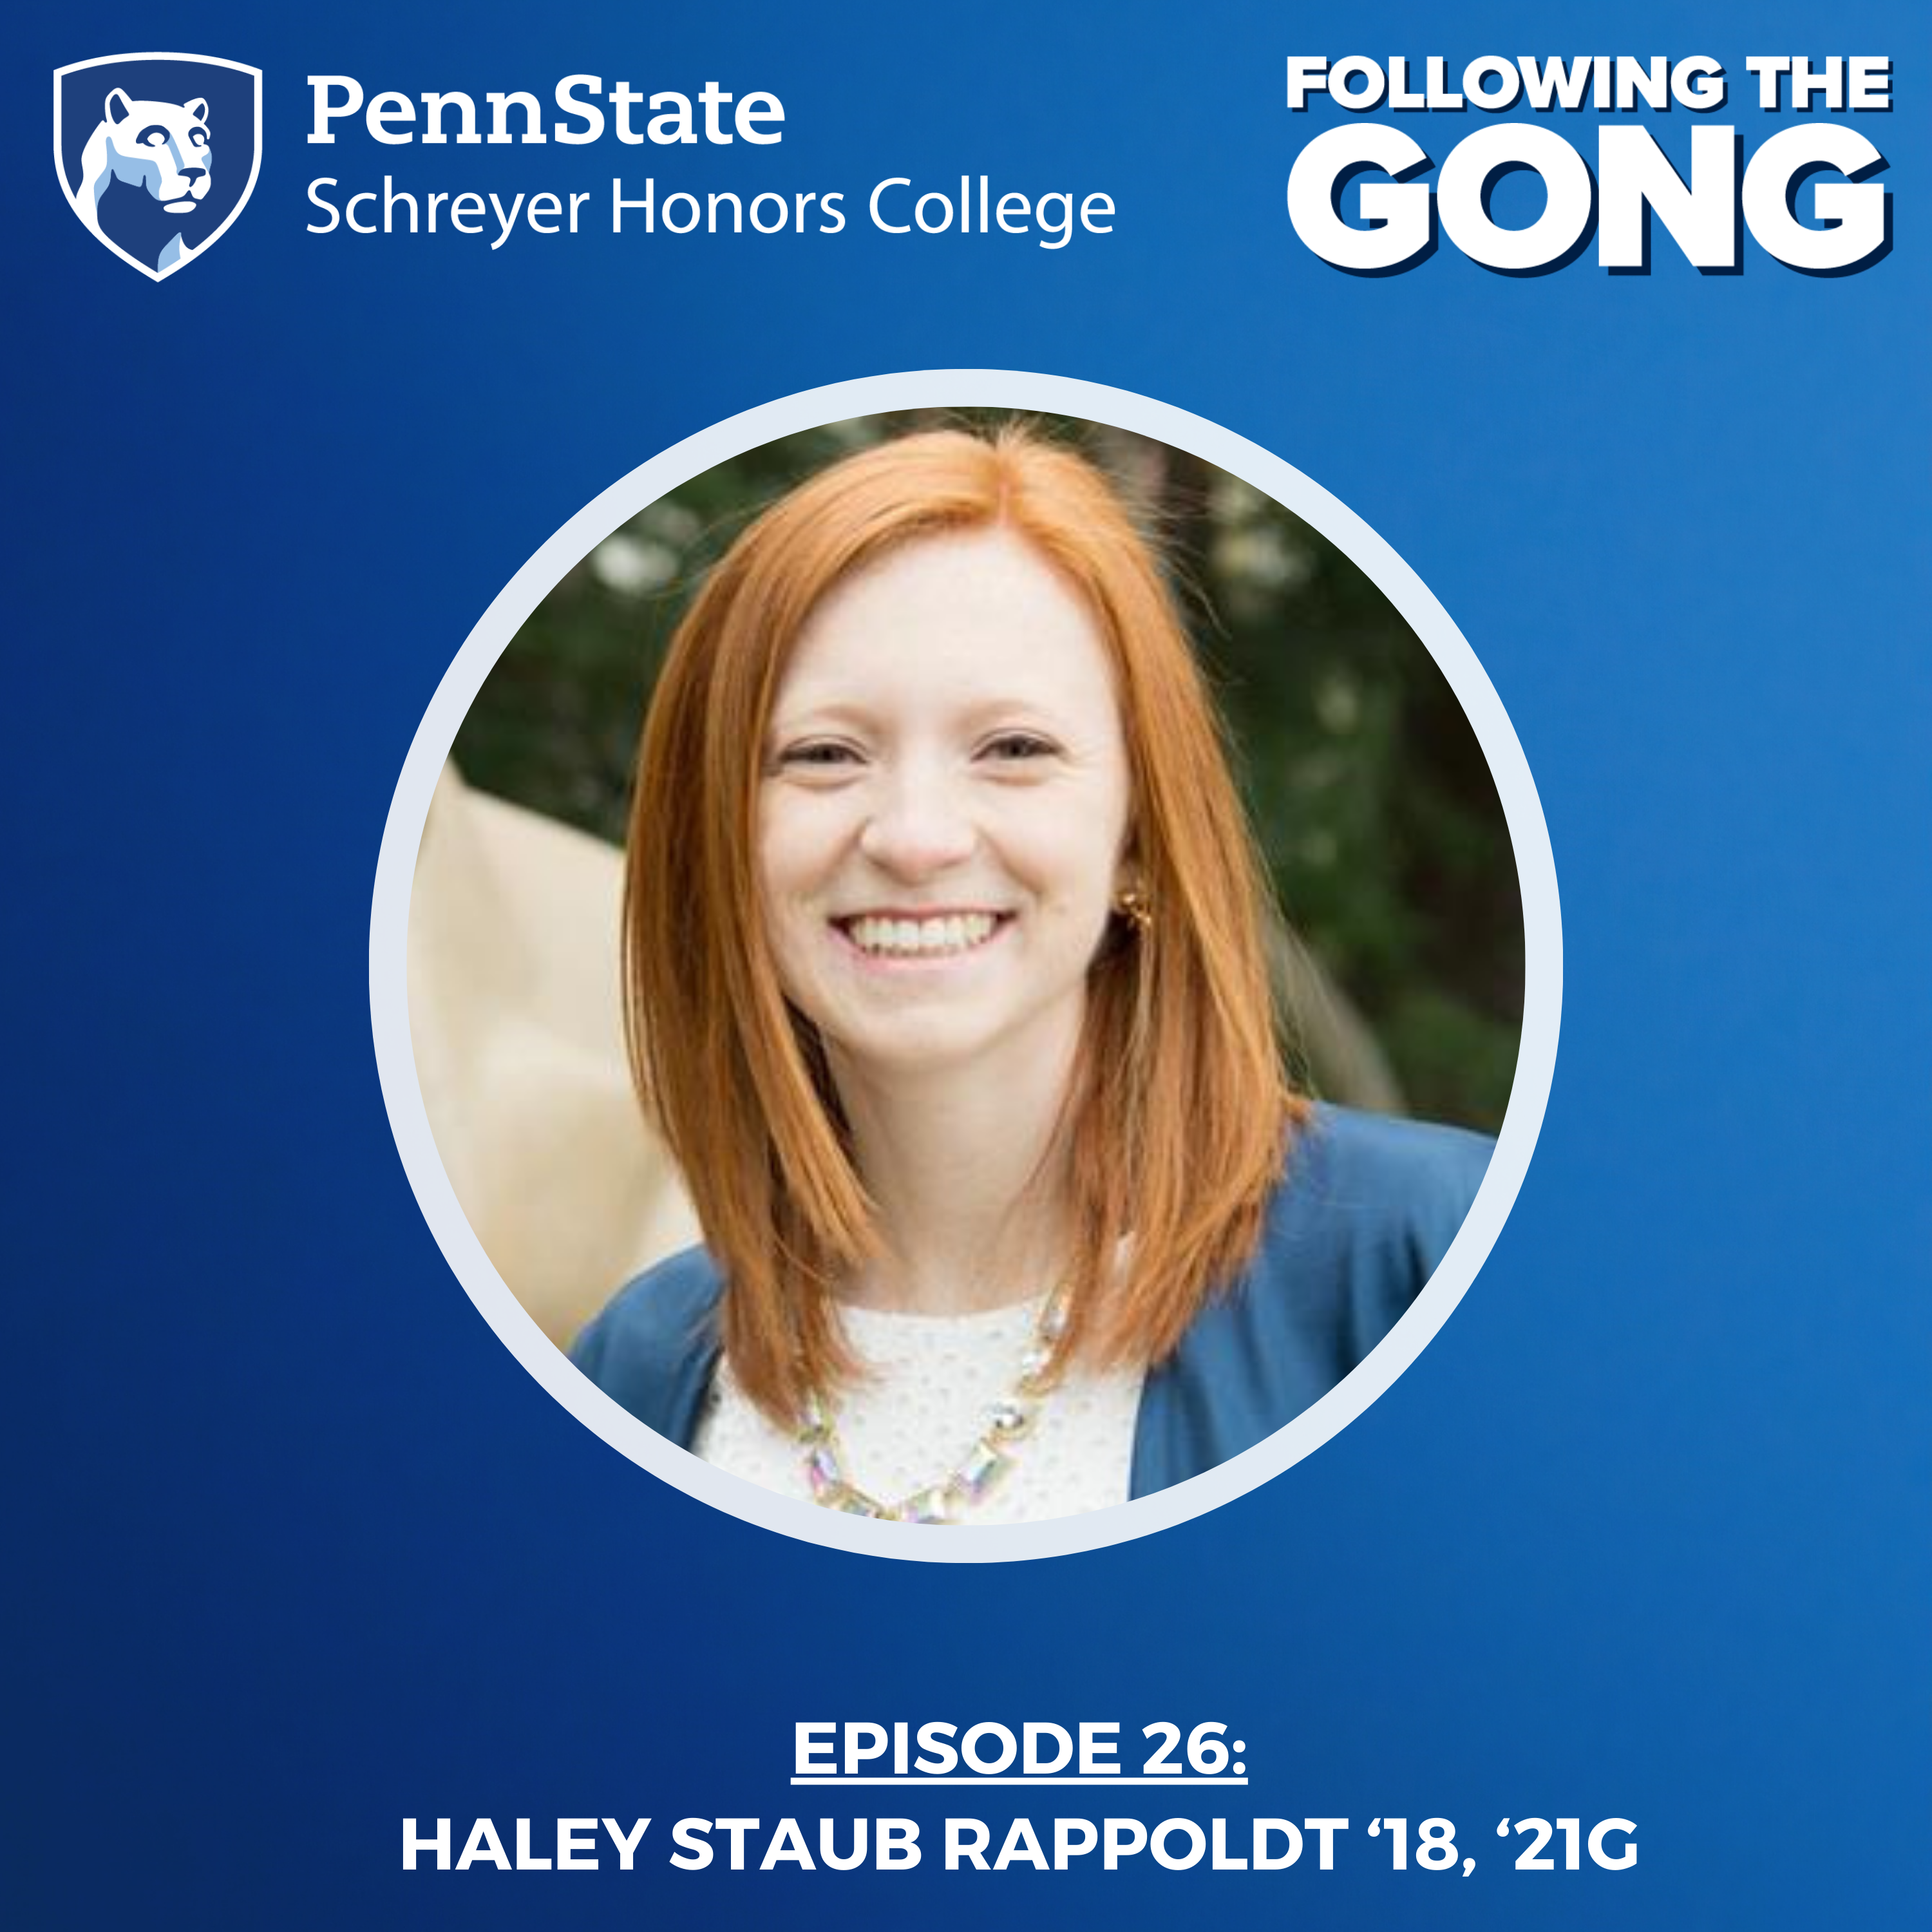 FTG 0026 - Supporting the Supporters with Volunteer Manager Haley Staub Rappoldt '18, '21g